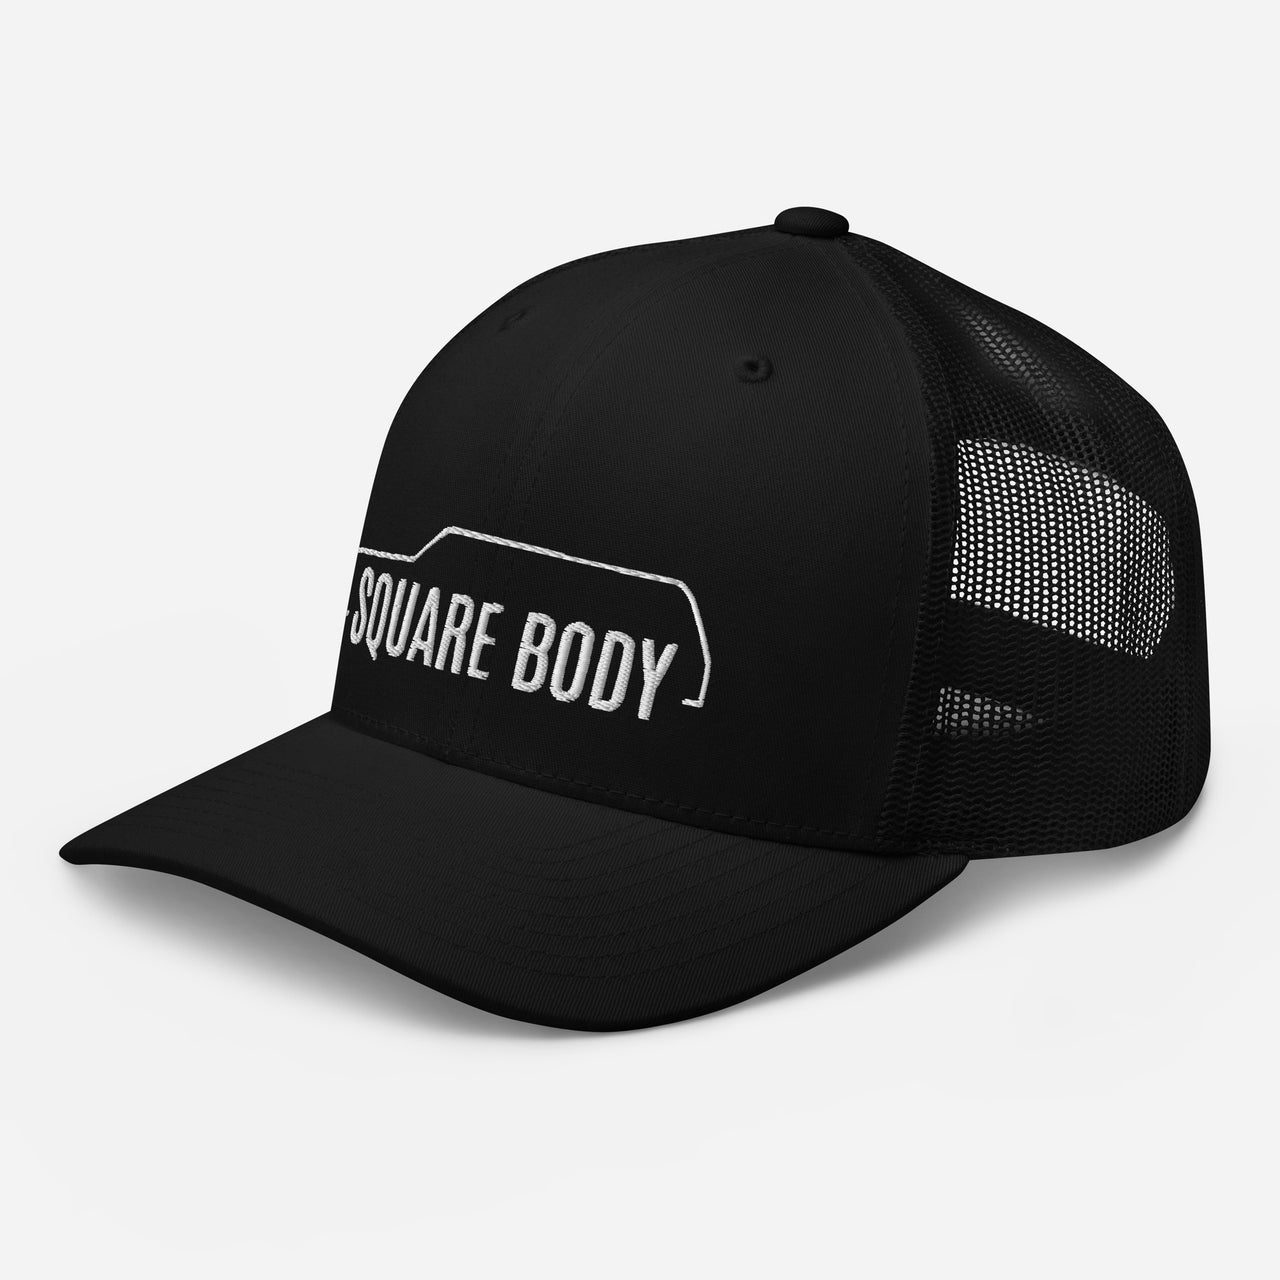 3/4 view of a square body suburban trucker hat from aggressive thread in black